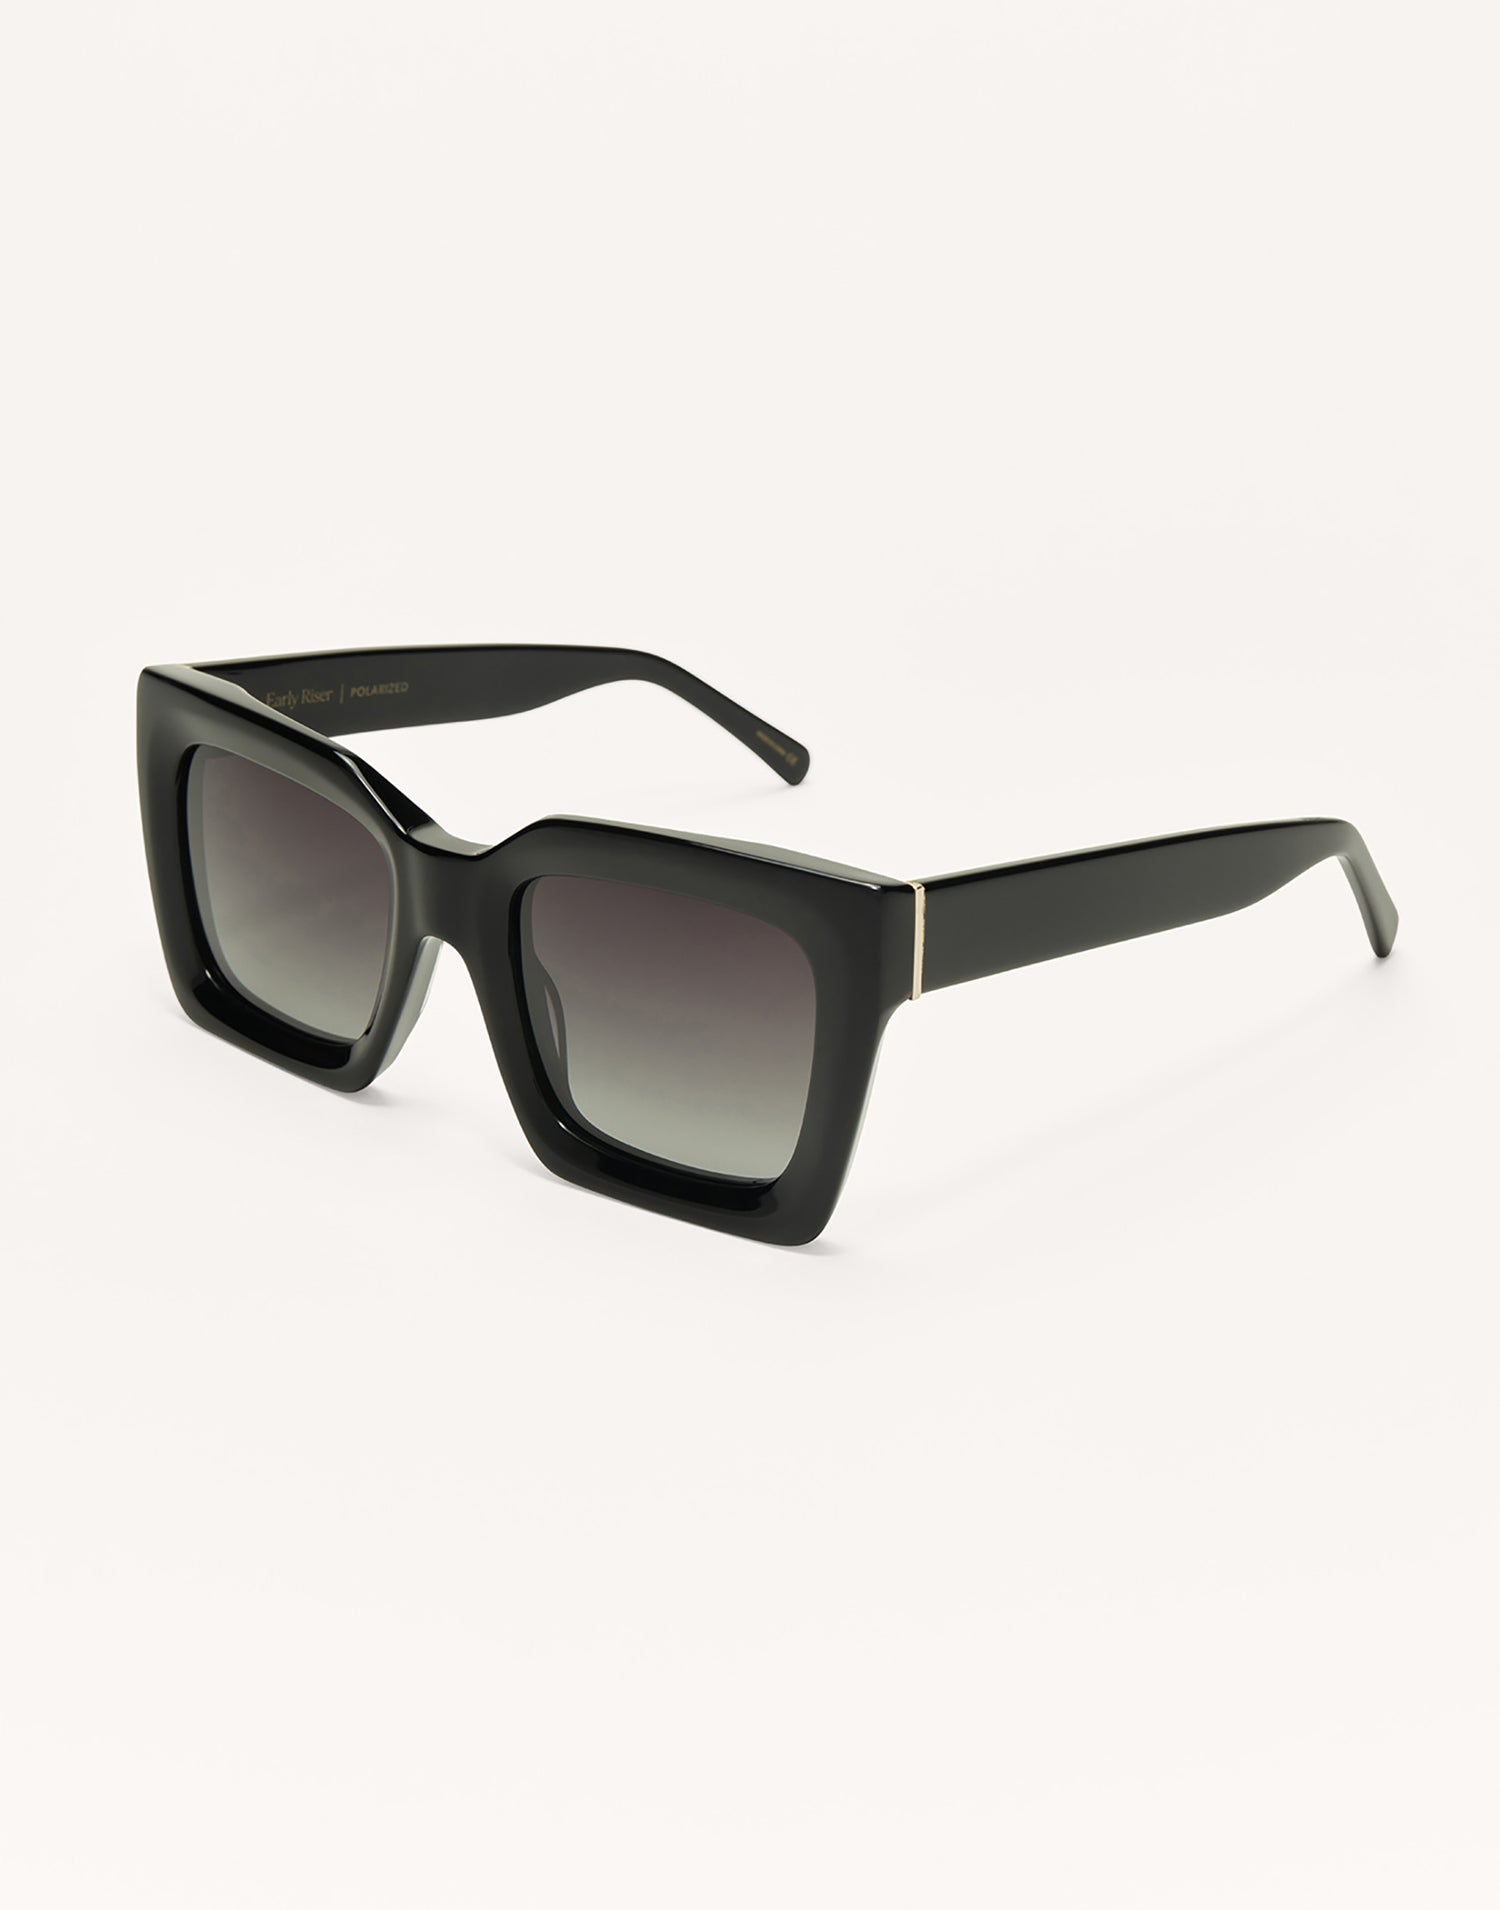 Early Riser Sunglasses by Z Supply in Polished Black - Angled View